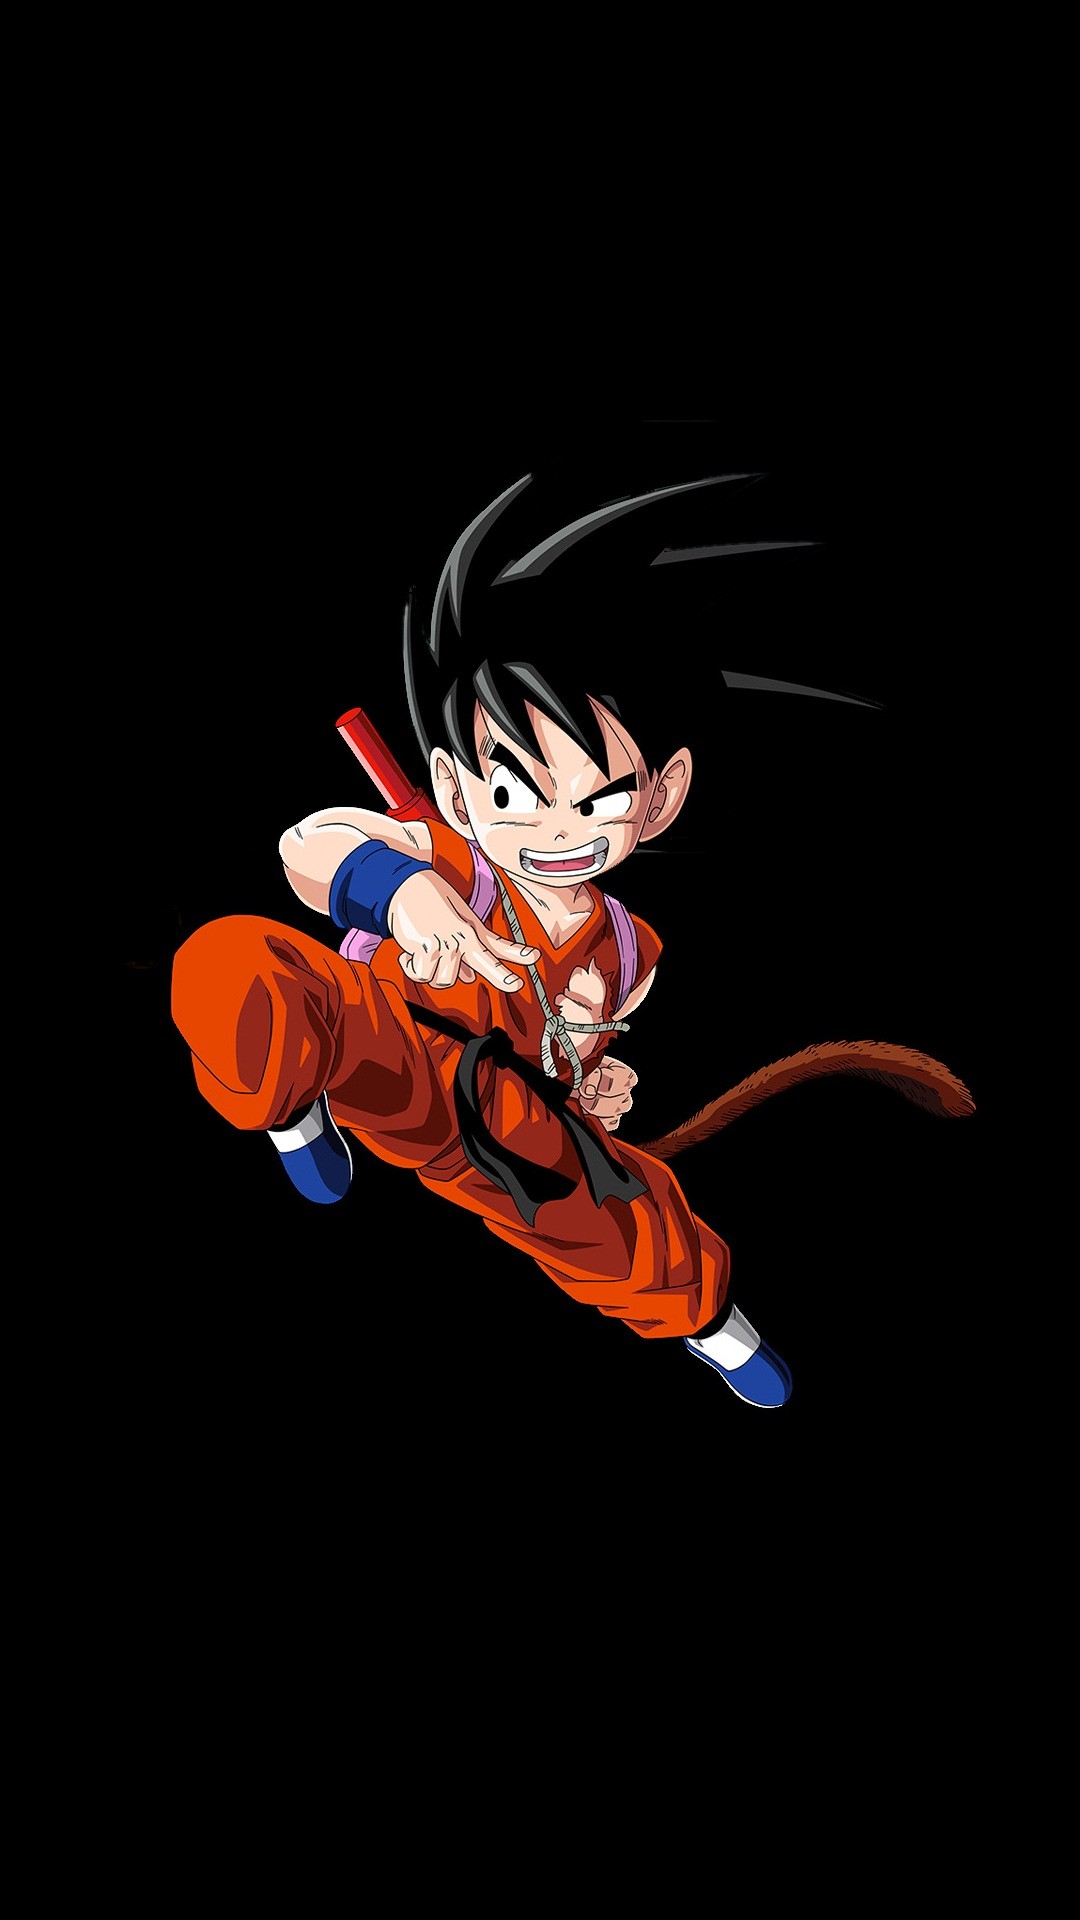 Kid Goku Wallpaper iPhone with image resolution 1080x1920 pixel. You can make this wallpaper for your iPhone 5, 6, 7, 8, X backgrounds, Mobile Screensaver, or iPad Lock Screen